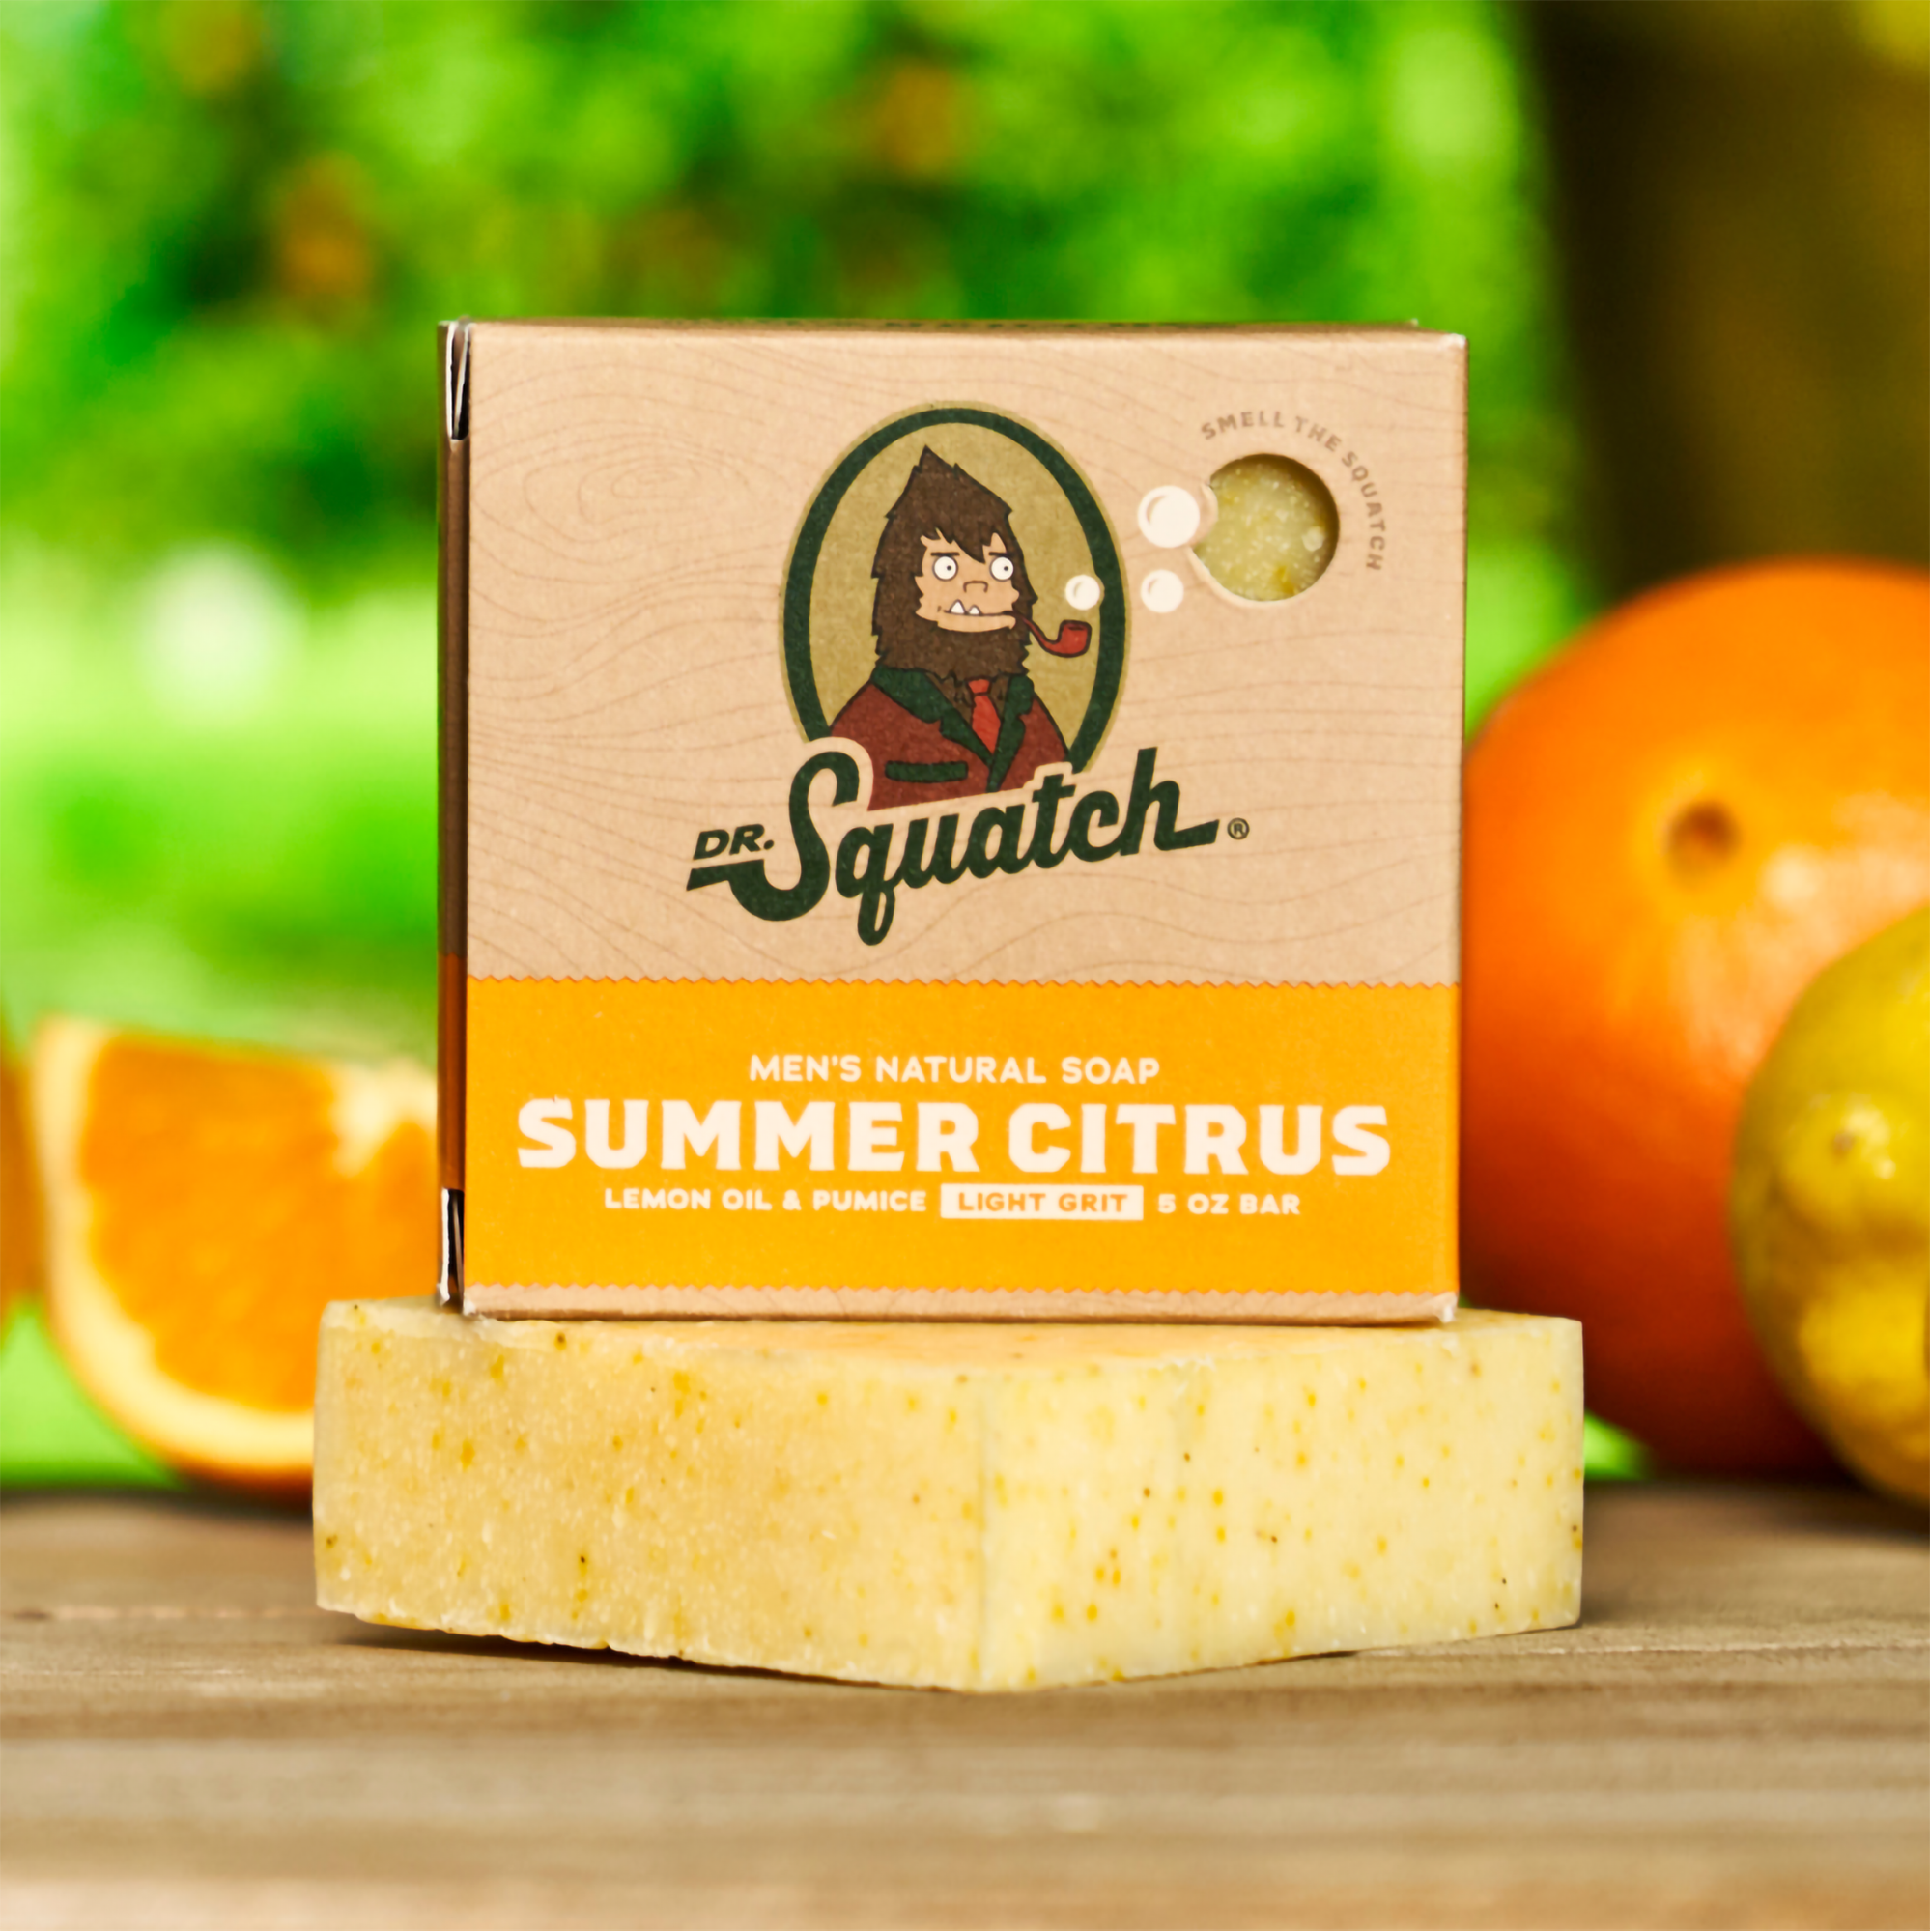  Dr. Squatch Men's Natural Bar Soap from Moisturizing Soap Made  from Natural Oils - Cold Process with No Harsh Chemicals - Exfoliating Soap  - Summer Citrus, Birchwood Breeze, Cool Fresh